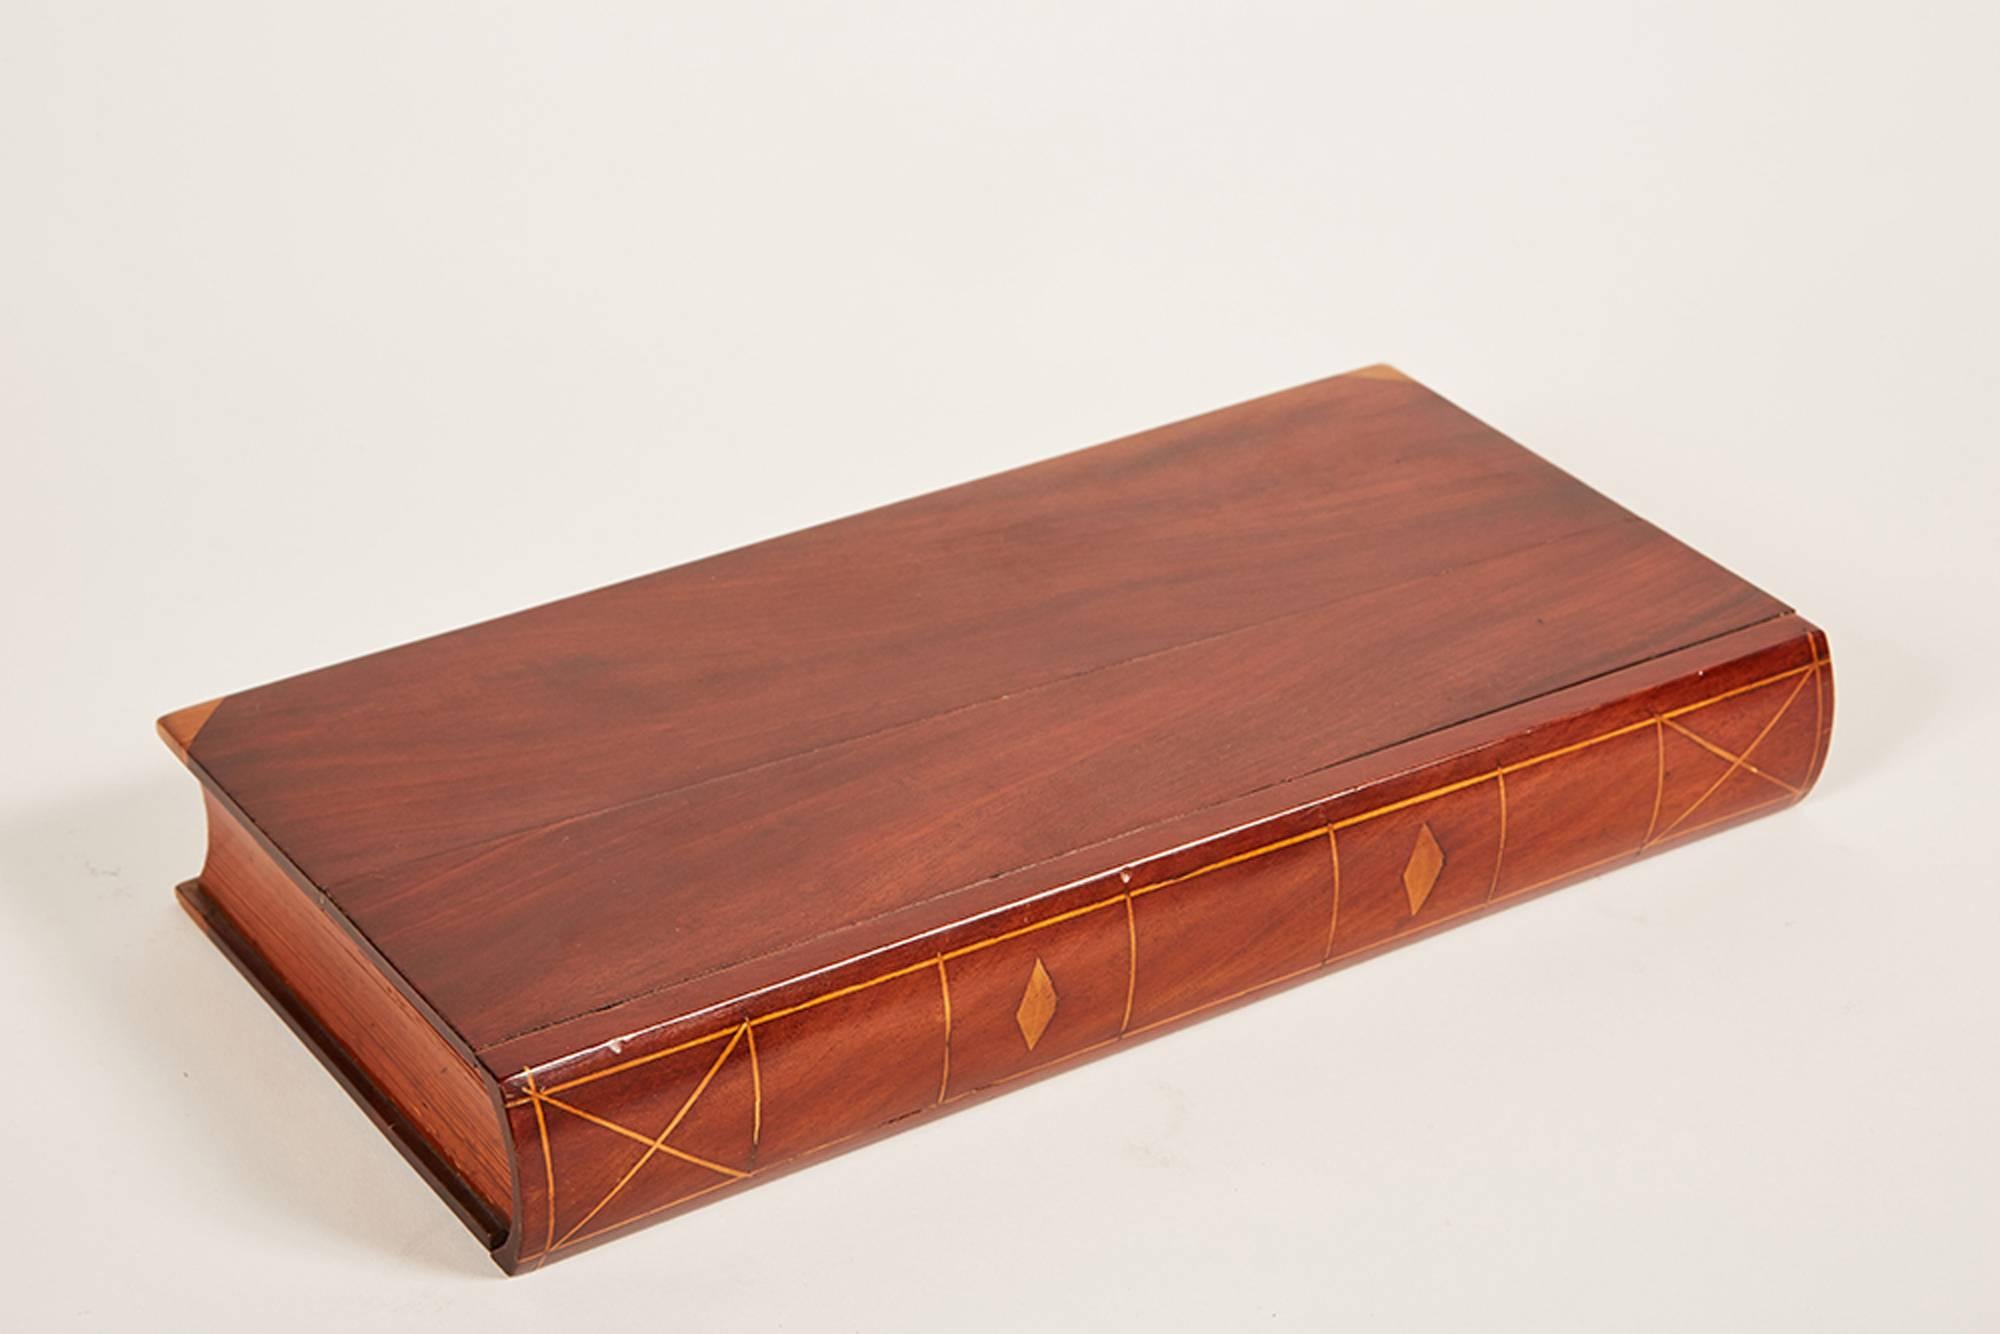 A mahogany “dummy” book the front inlaid and “pages” simulated by pitch pine. The pulls open to reveal a drawer with compartments.